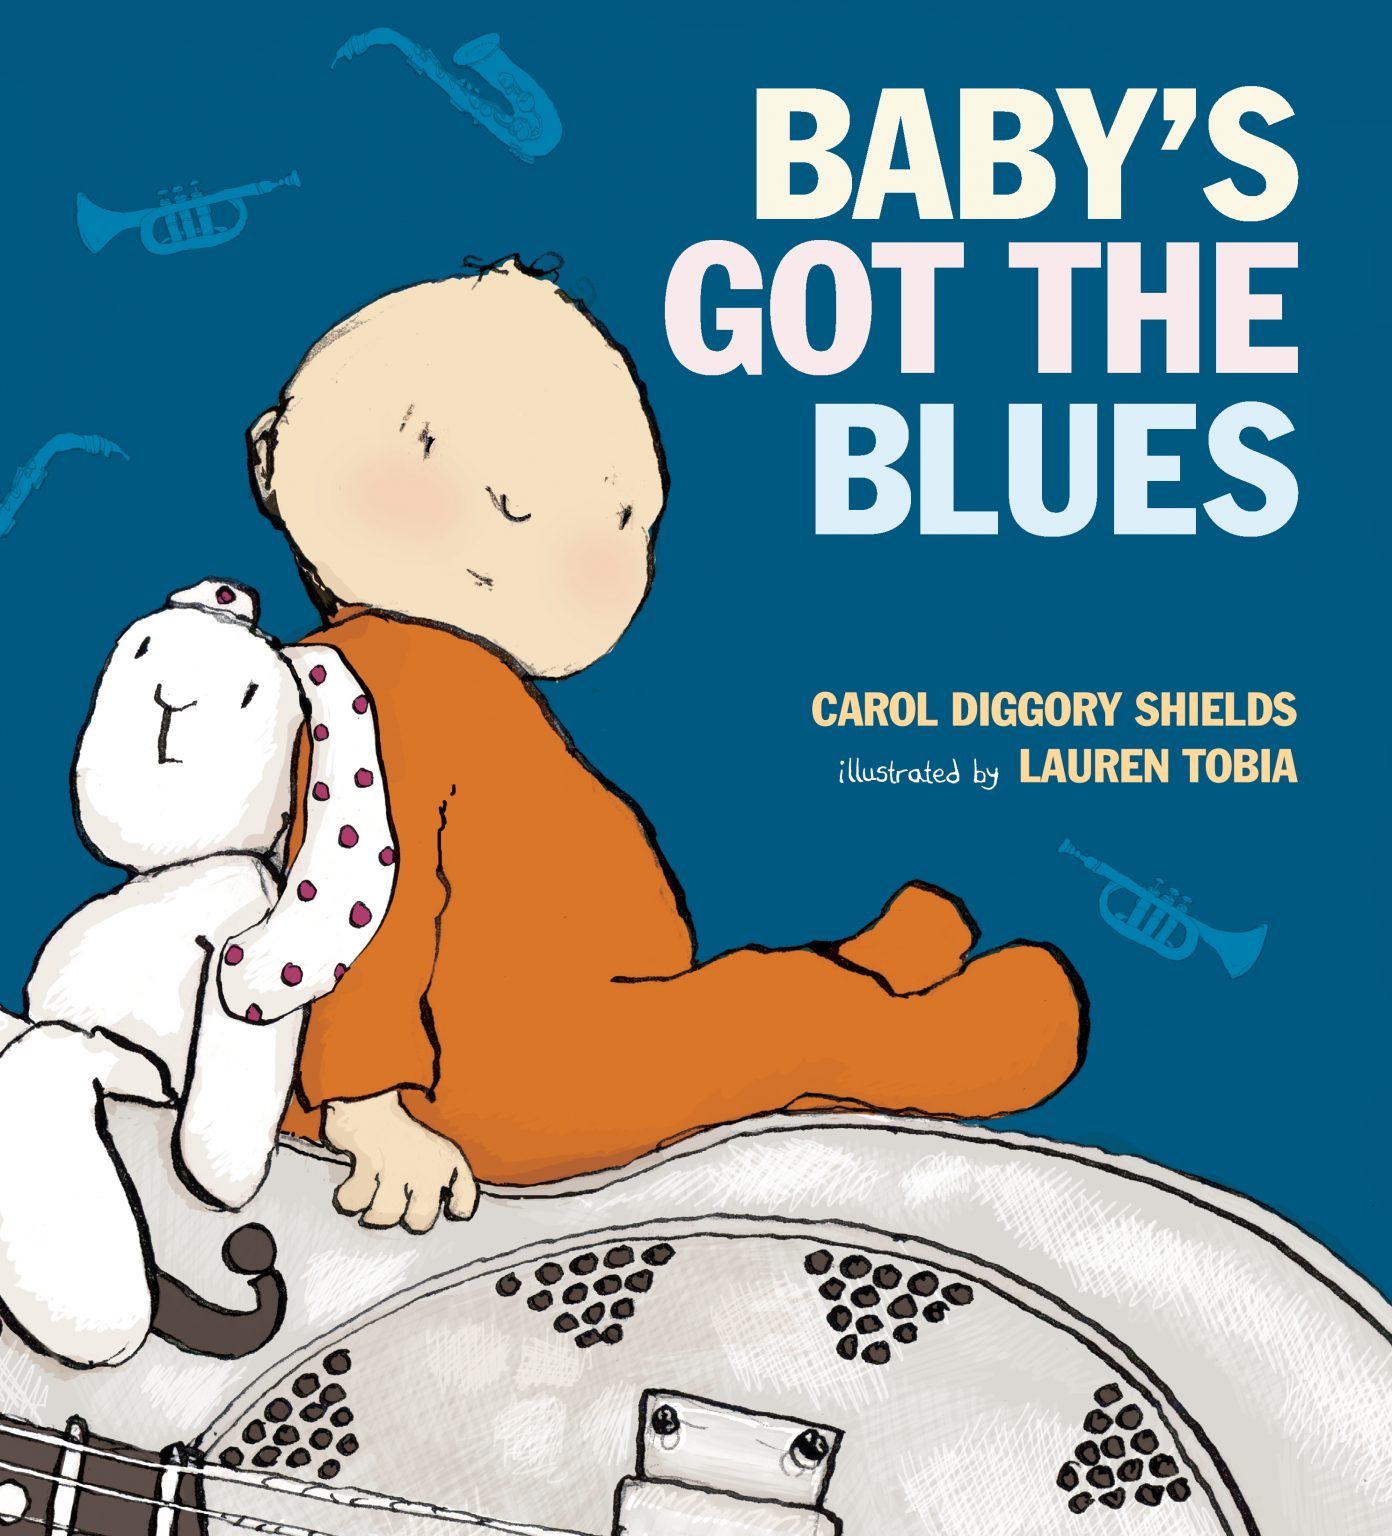 Baby Blues. A New Baby книга про. Baby got. Baby s coming Home pdf.